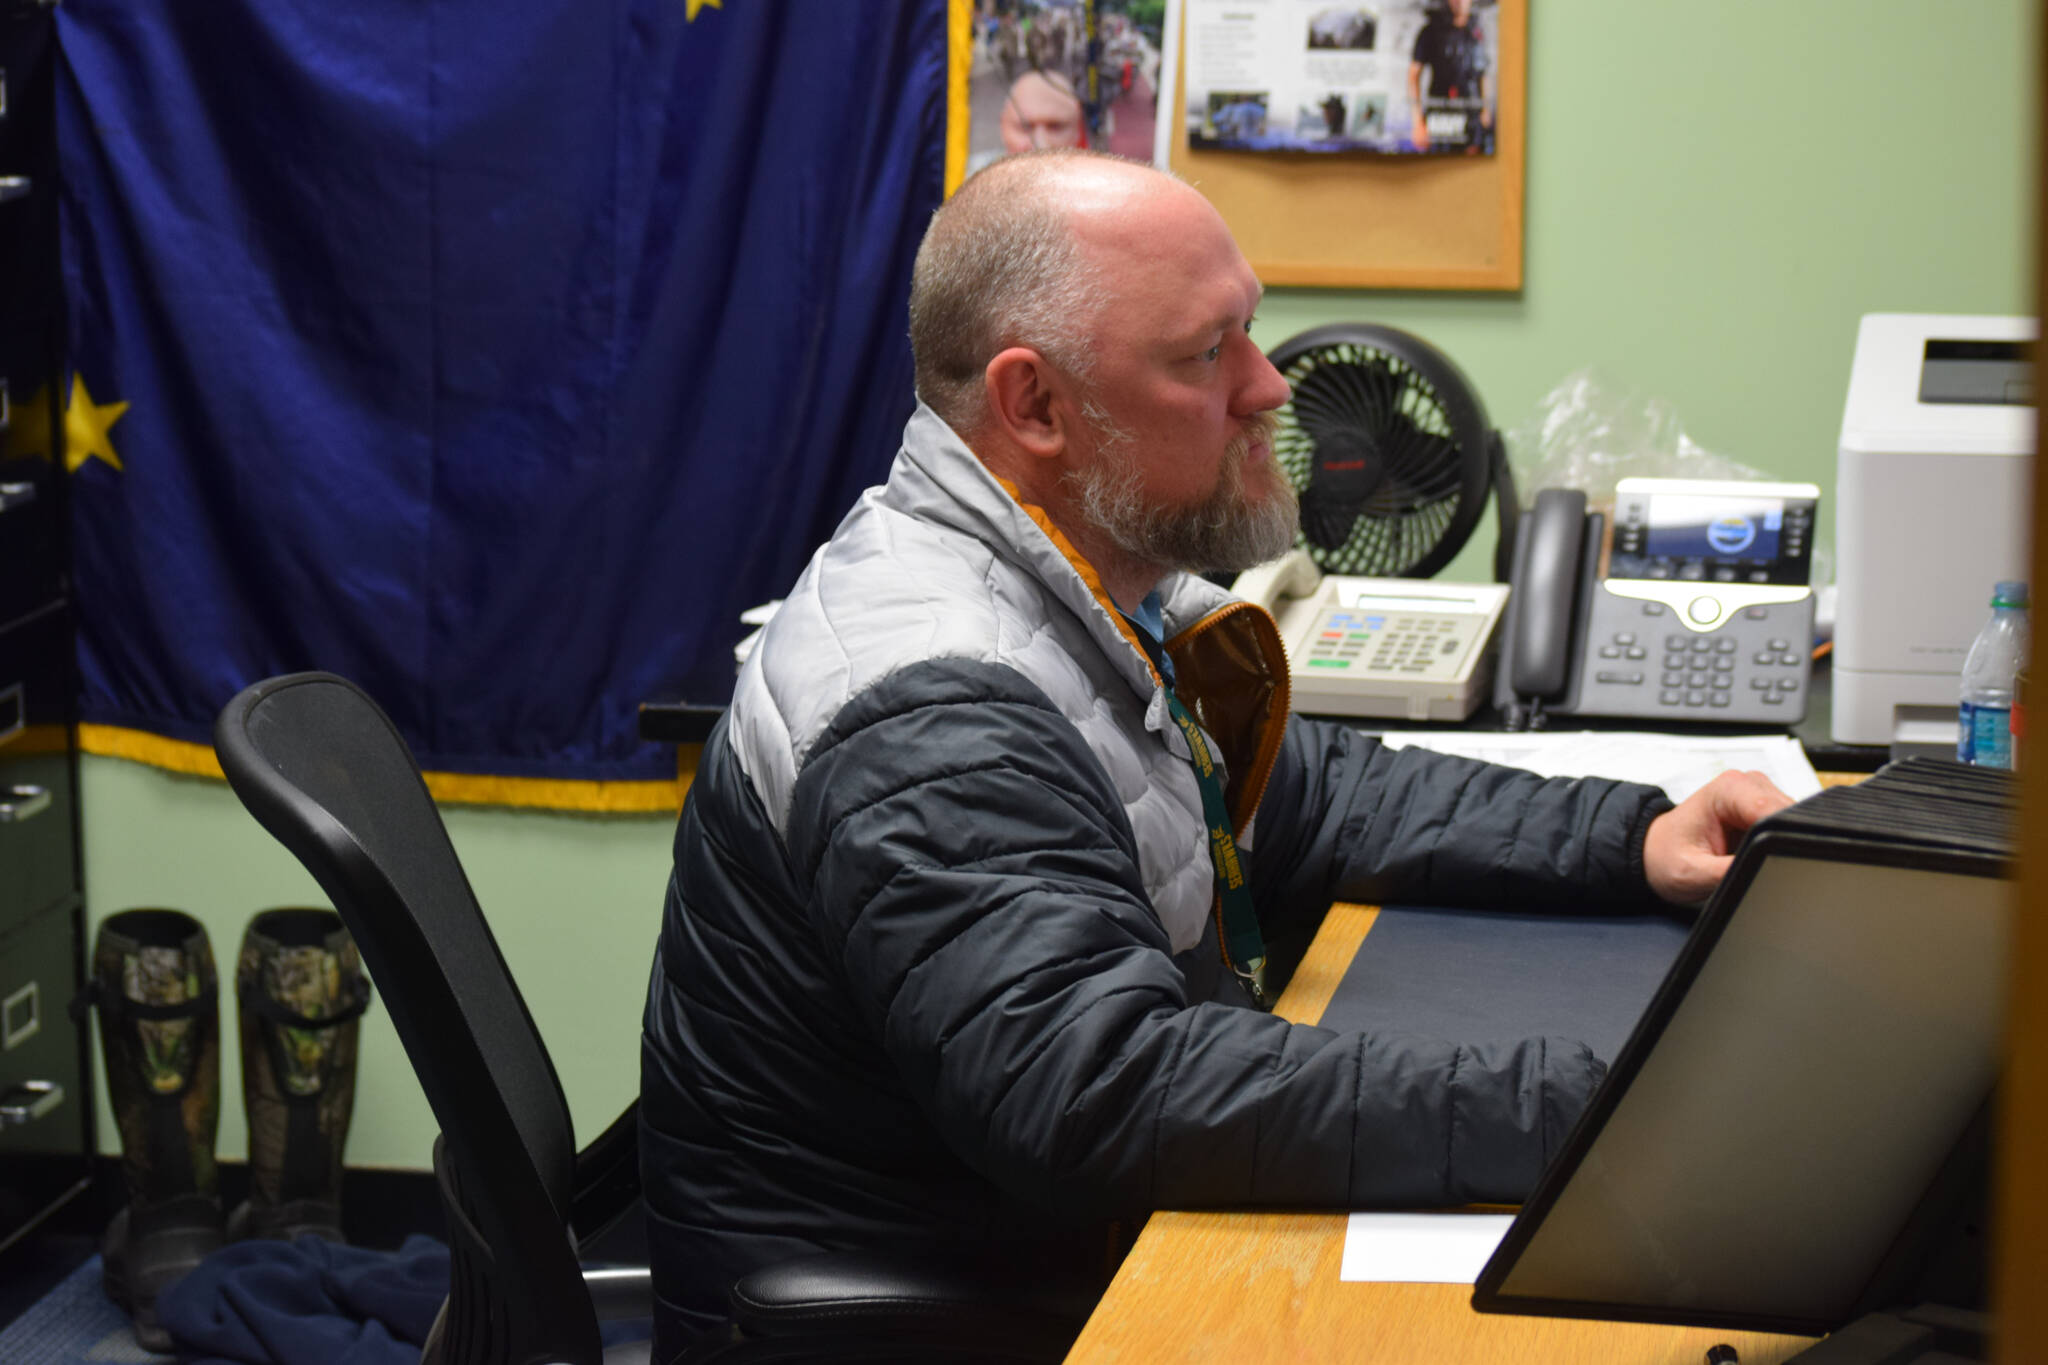 Henry Burns, principal of Seward High School, works in his office in in Seward, Alaska on Tuesday, May 3, 2022. (Camille Botello/Peninsula Clarion)